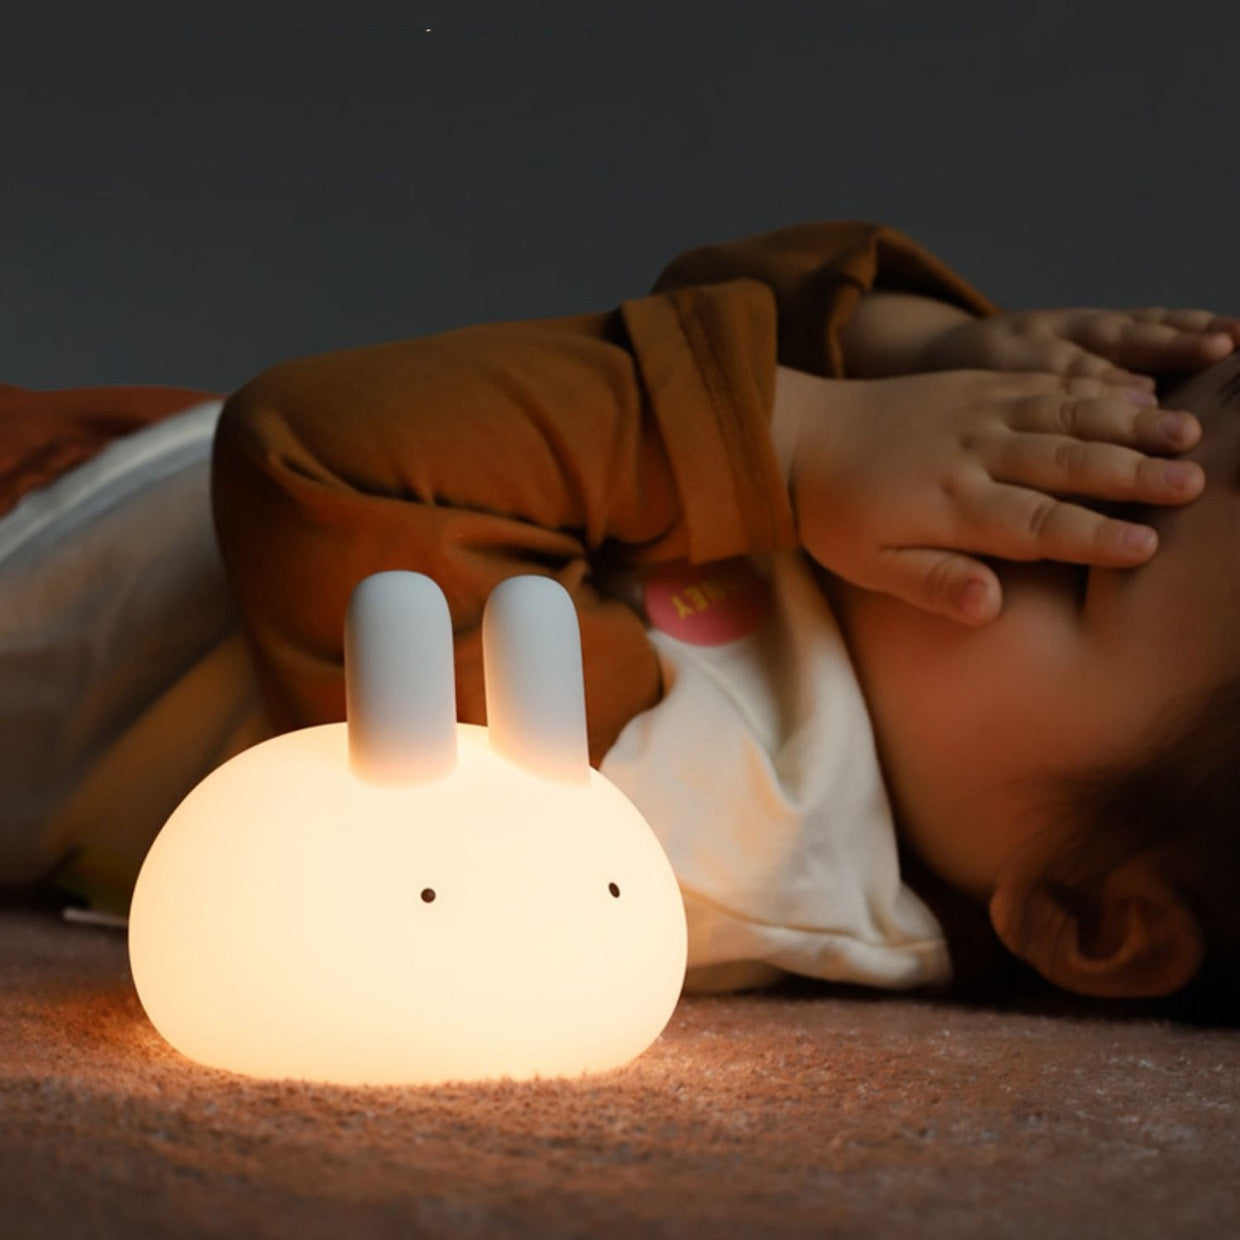 << 1 - 4 DAYS DELIVERY >> MUID Cute Bunny LED Night Lamp